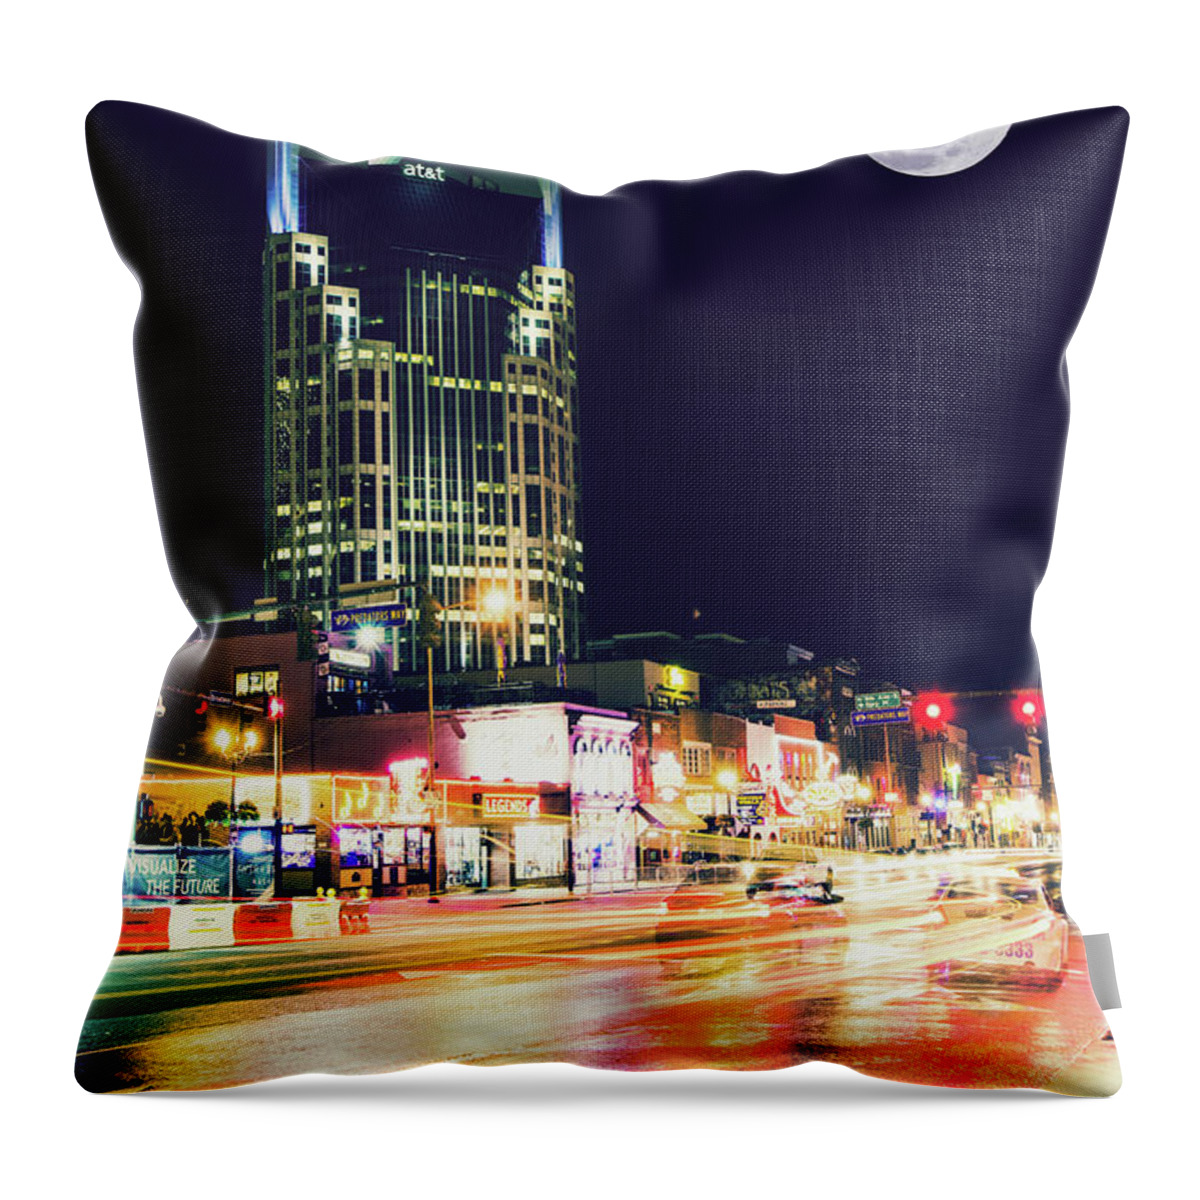 Nashville Skyline Throw Pillow featuring the photograph Nashville Supermoon From Lower Broadway by Gregory Ballos